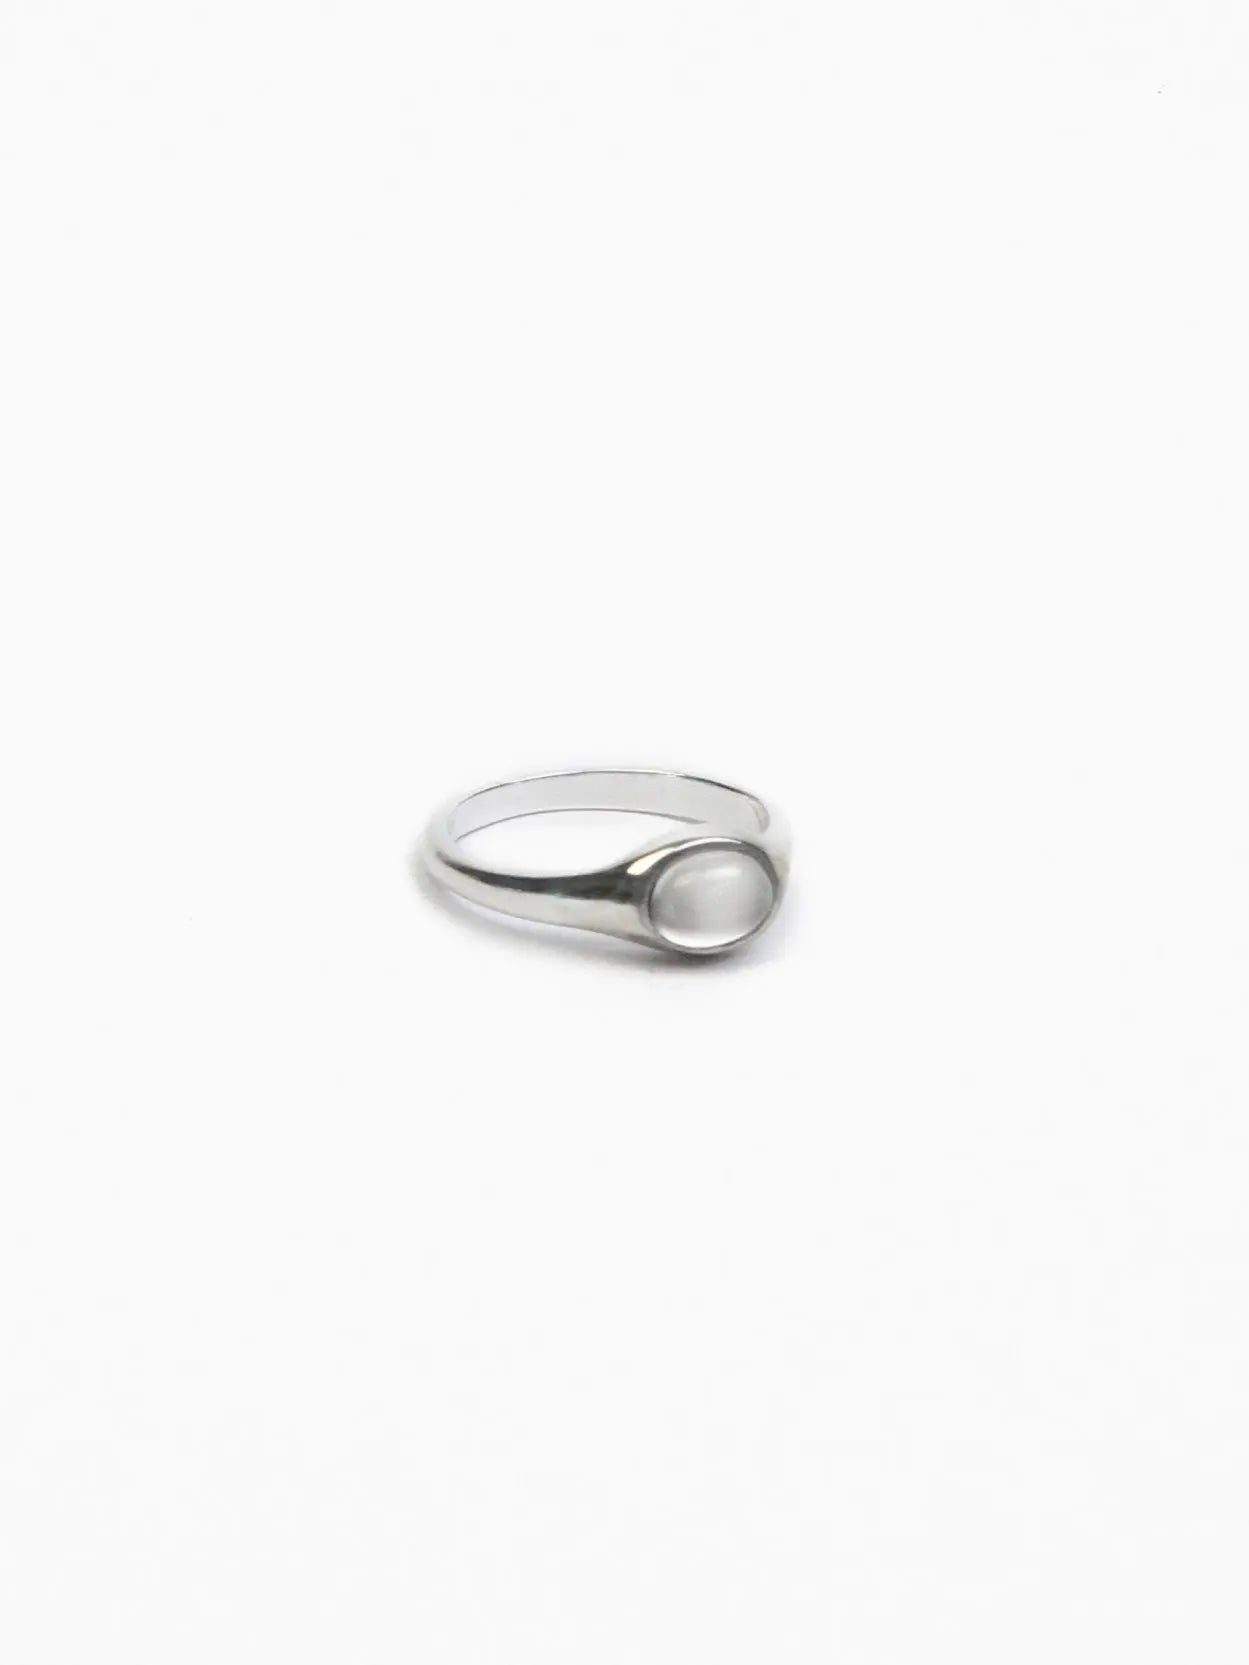 A minimalist silver ring with a smooth, oval-shaped white stone set in the center against a plain white background. The band is slender and simplistic, complementing the elegant and understated design of the Single Stone Ring by Nathalie Schreckenberg available at BassalStore in Barcelona.